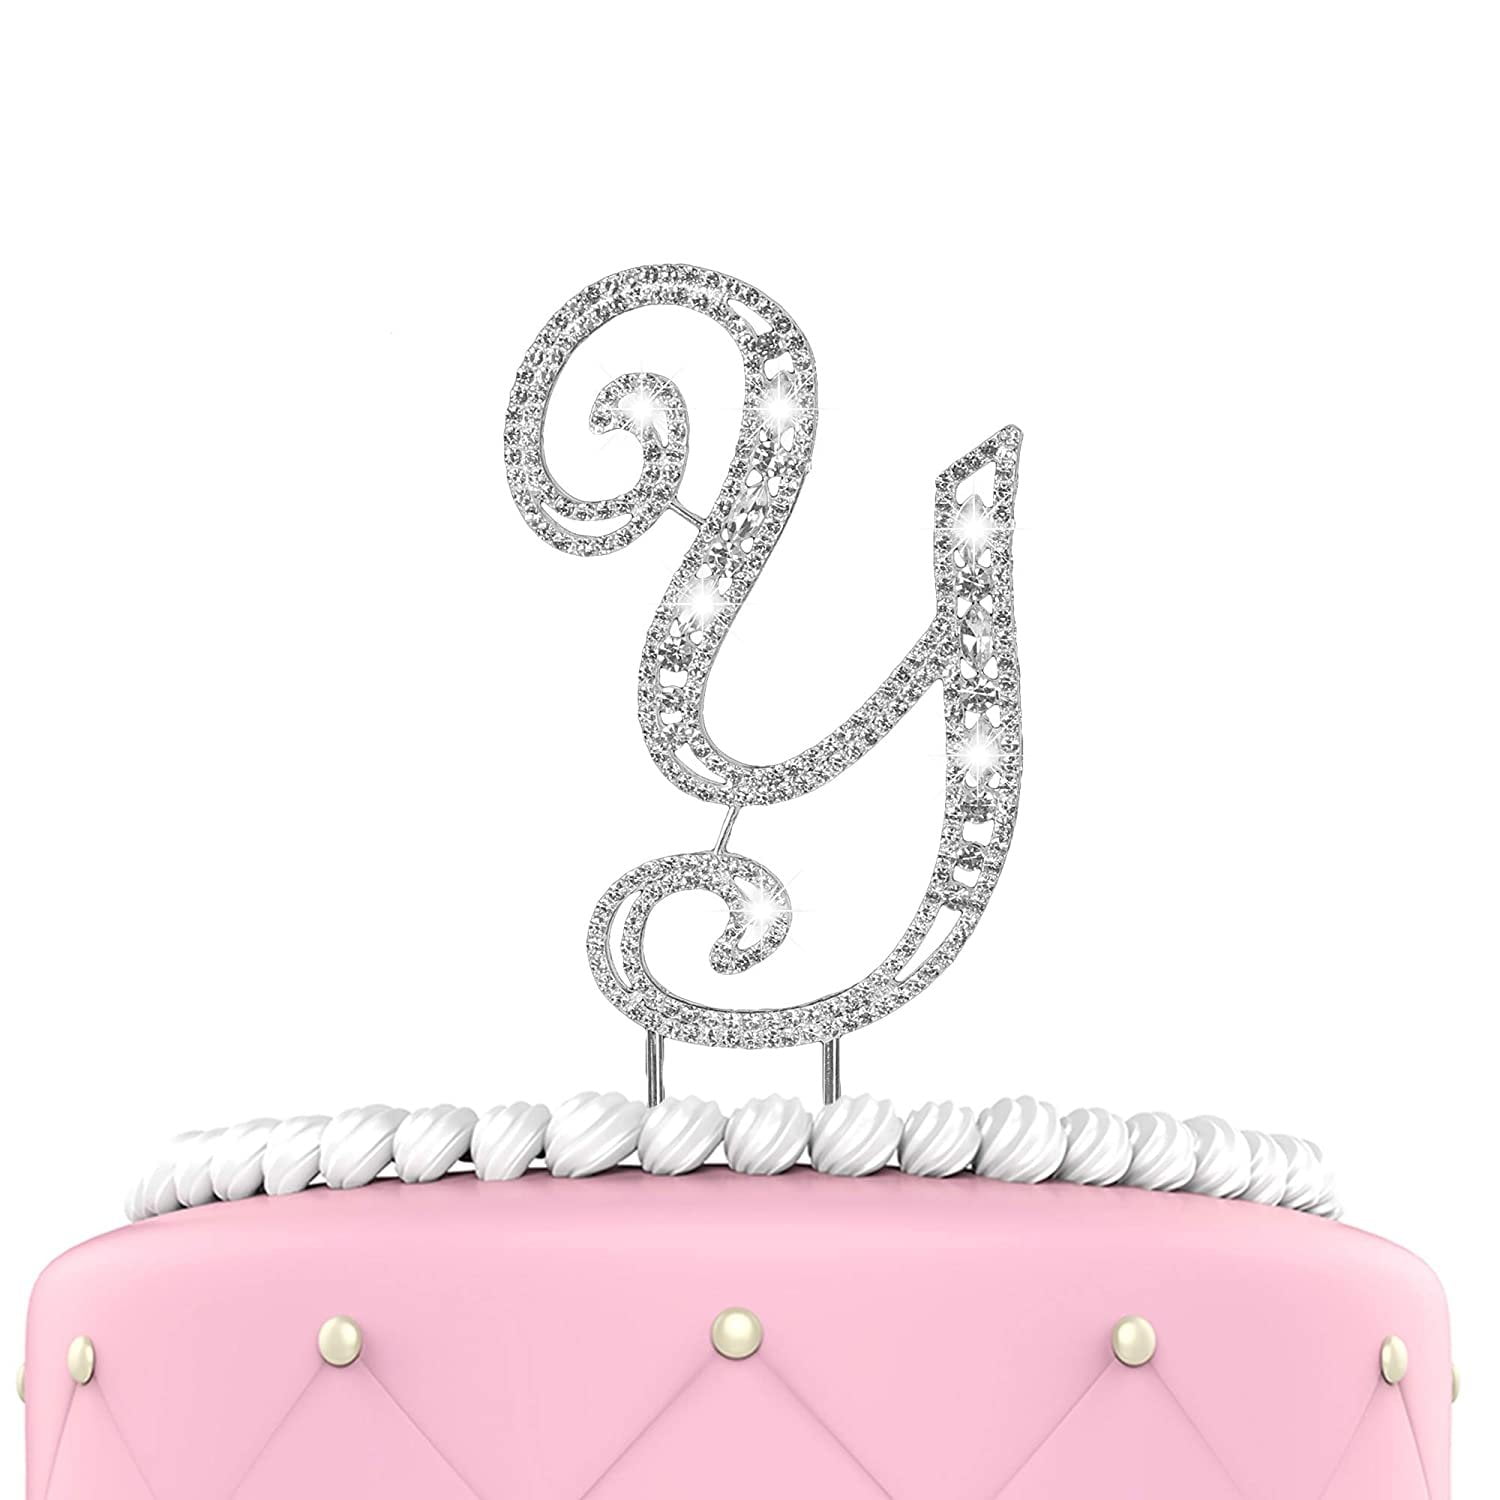 Celebrate in Style with a Silver Birthday Cake | Yummy Cake